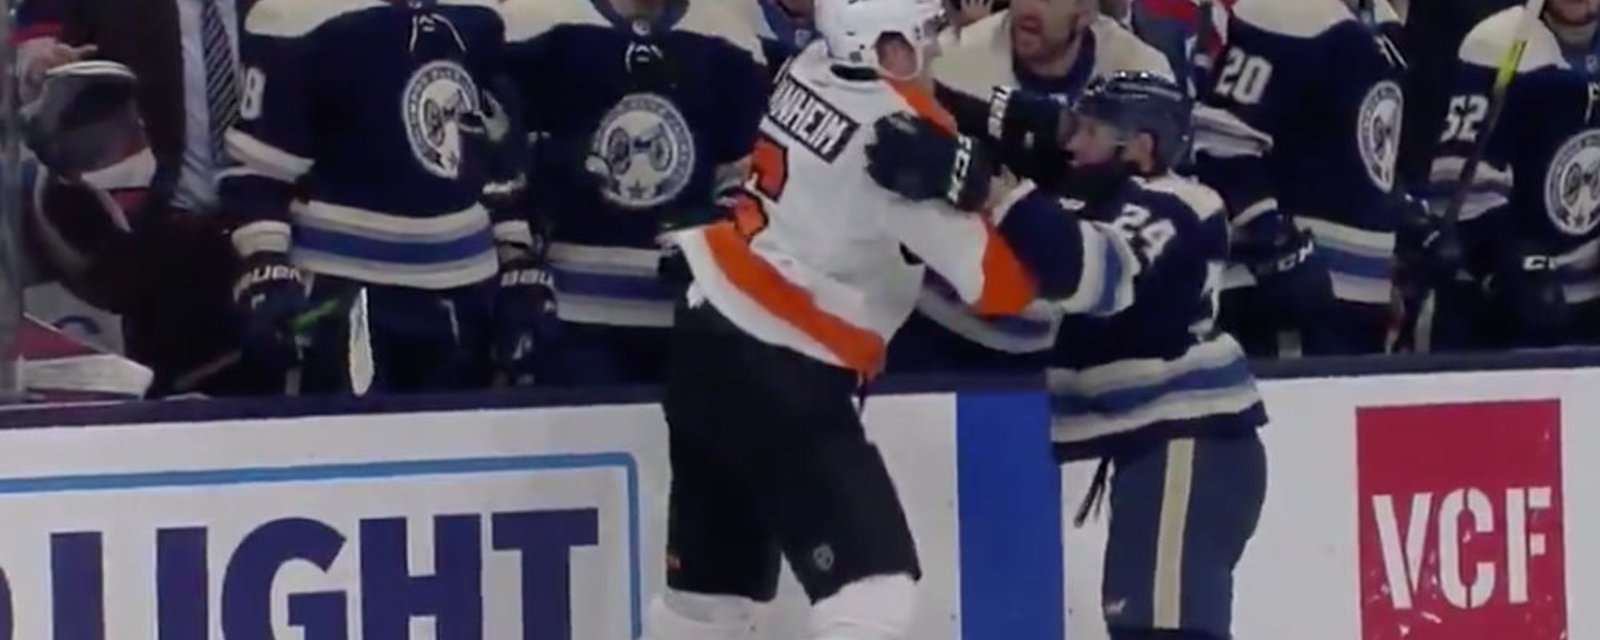 5’4 Gerbe takes down 6’3 Sanheim in a fight! 